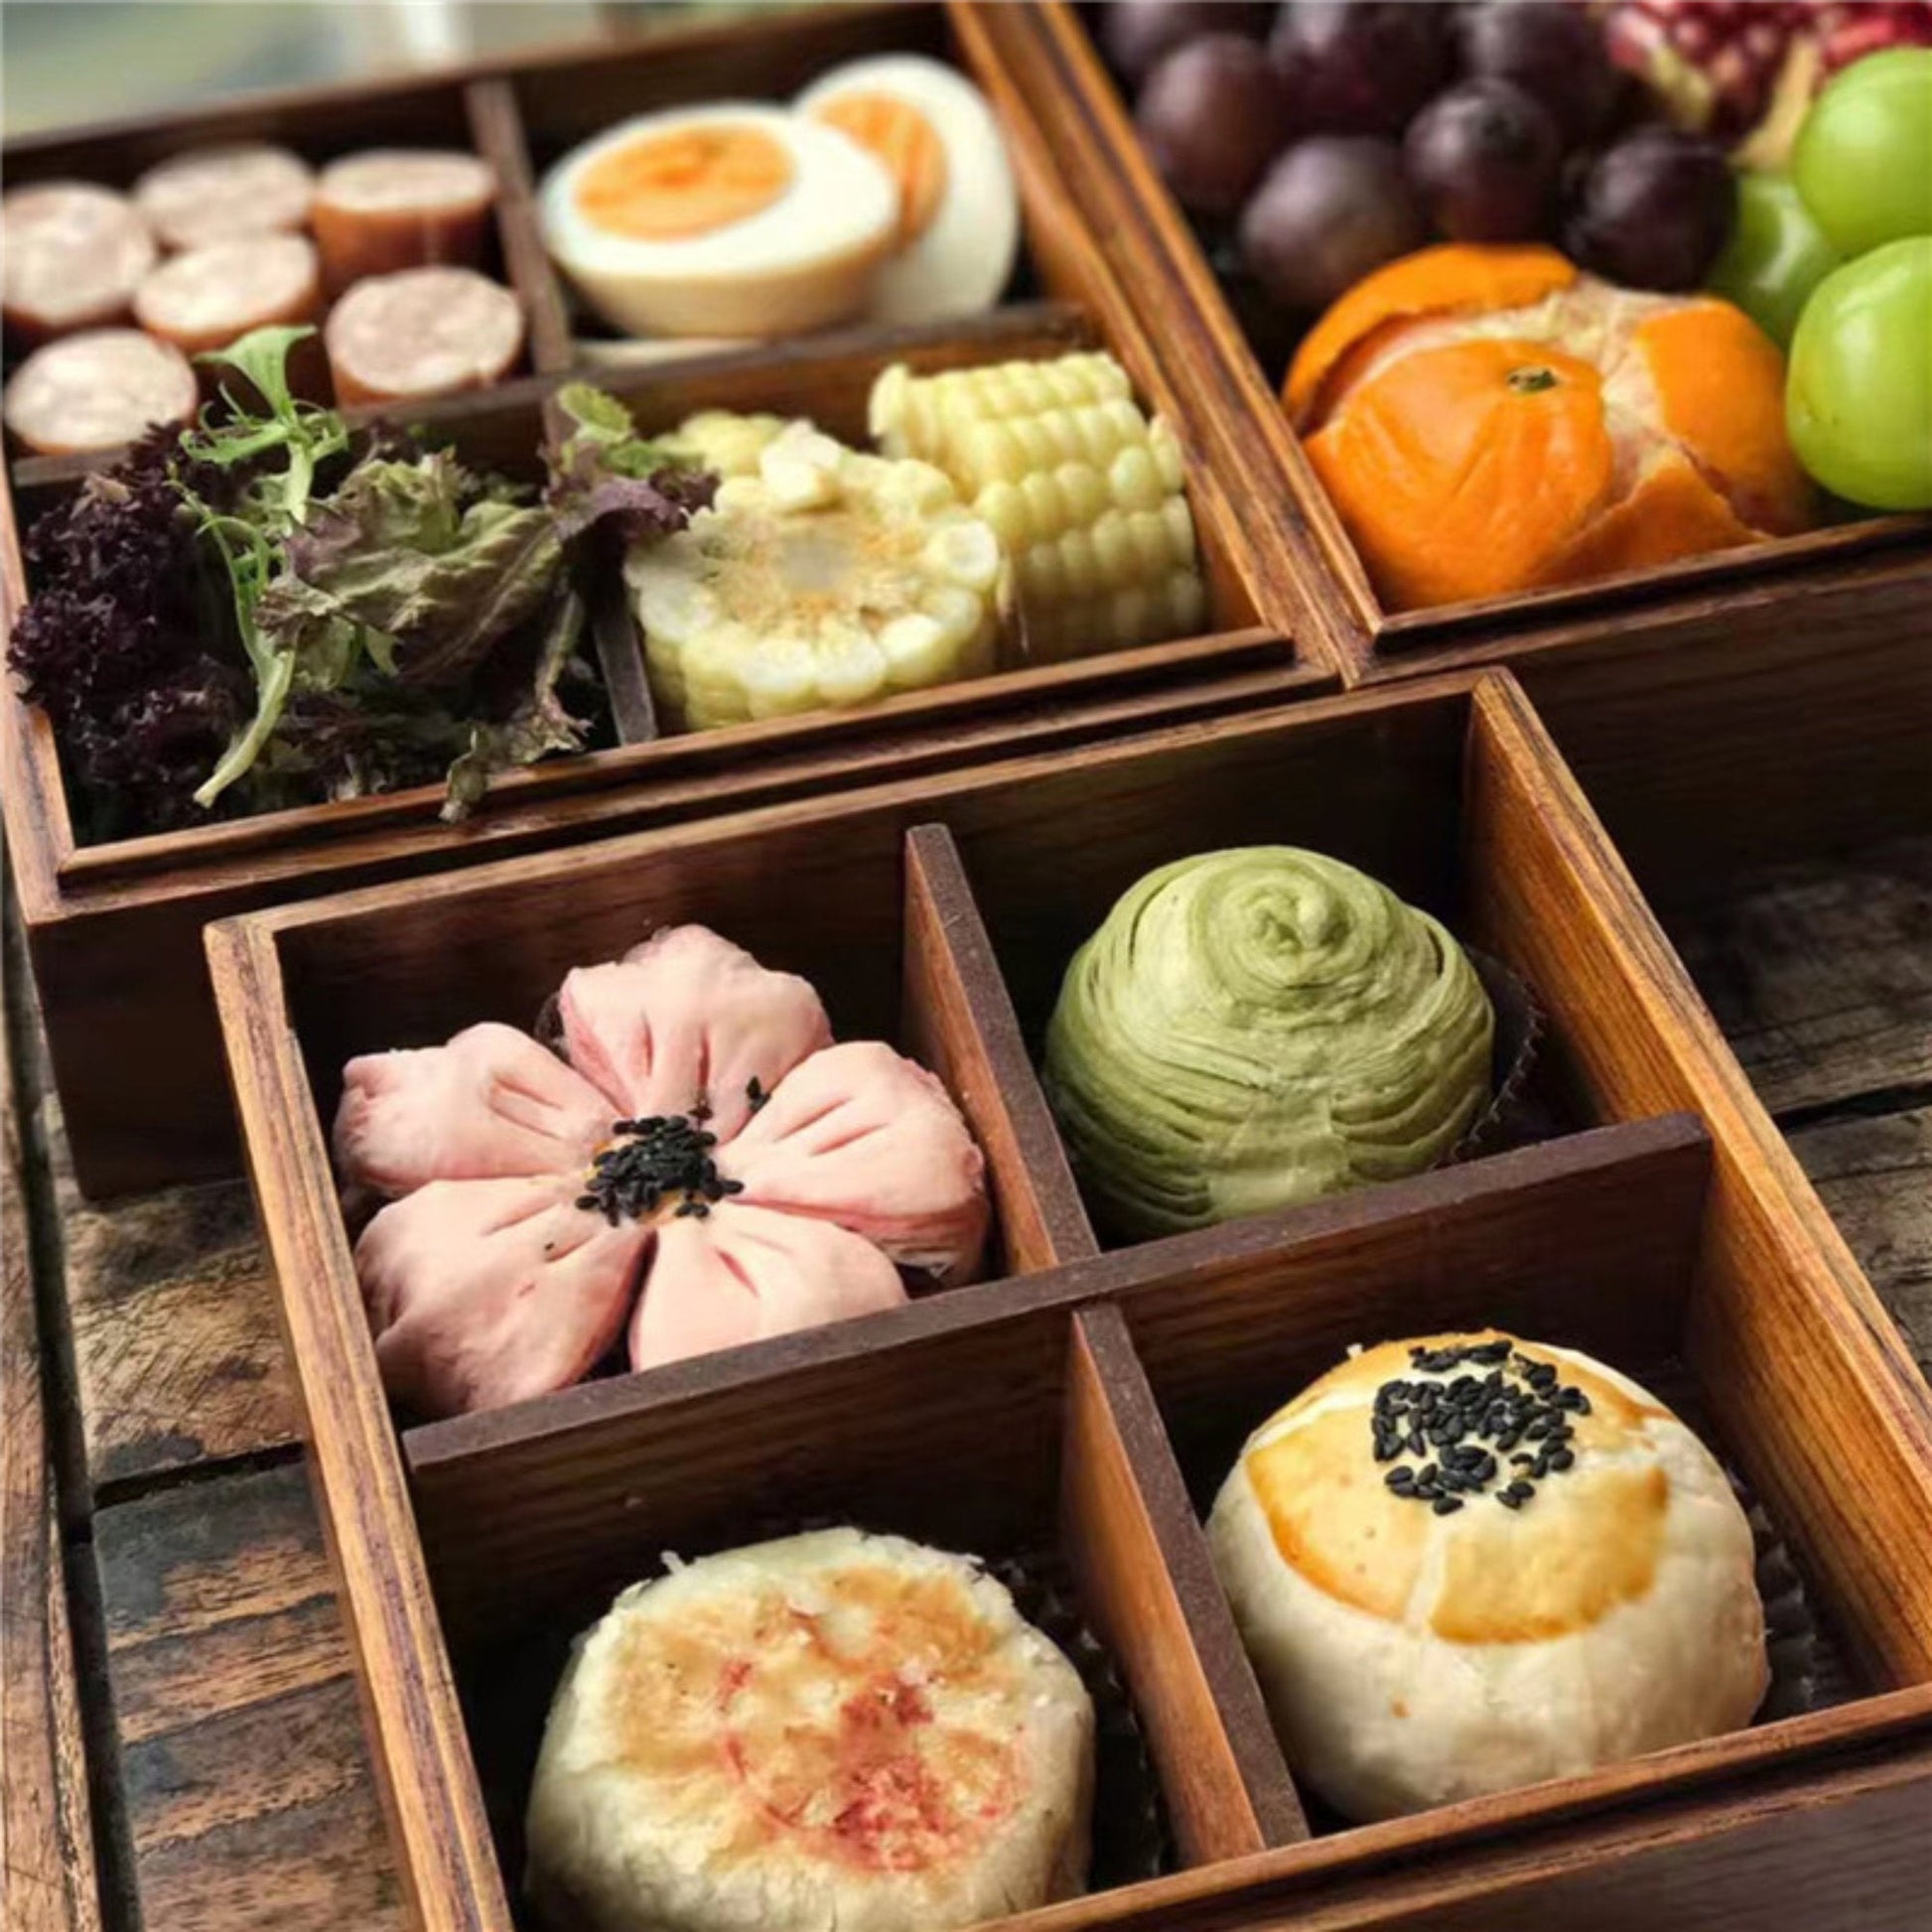 Transform Your Boring Lunch with the Best Bento Accessories!